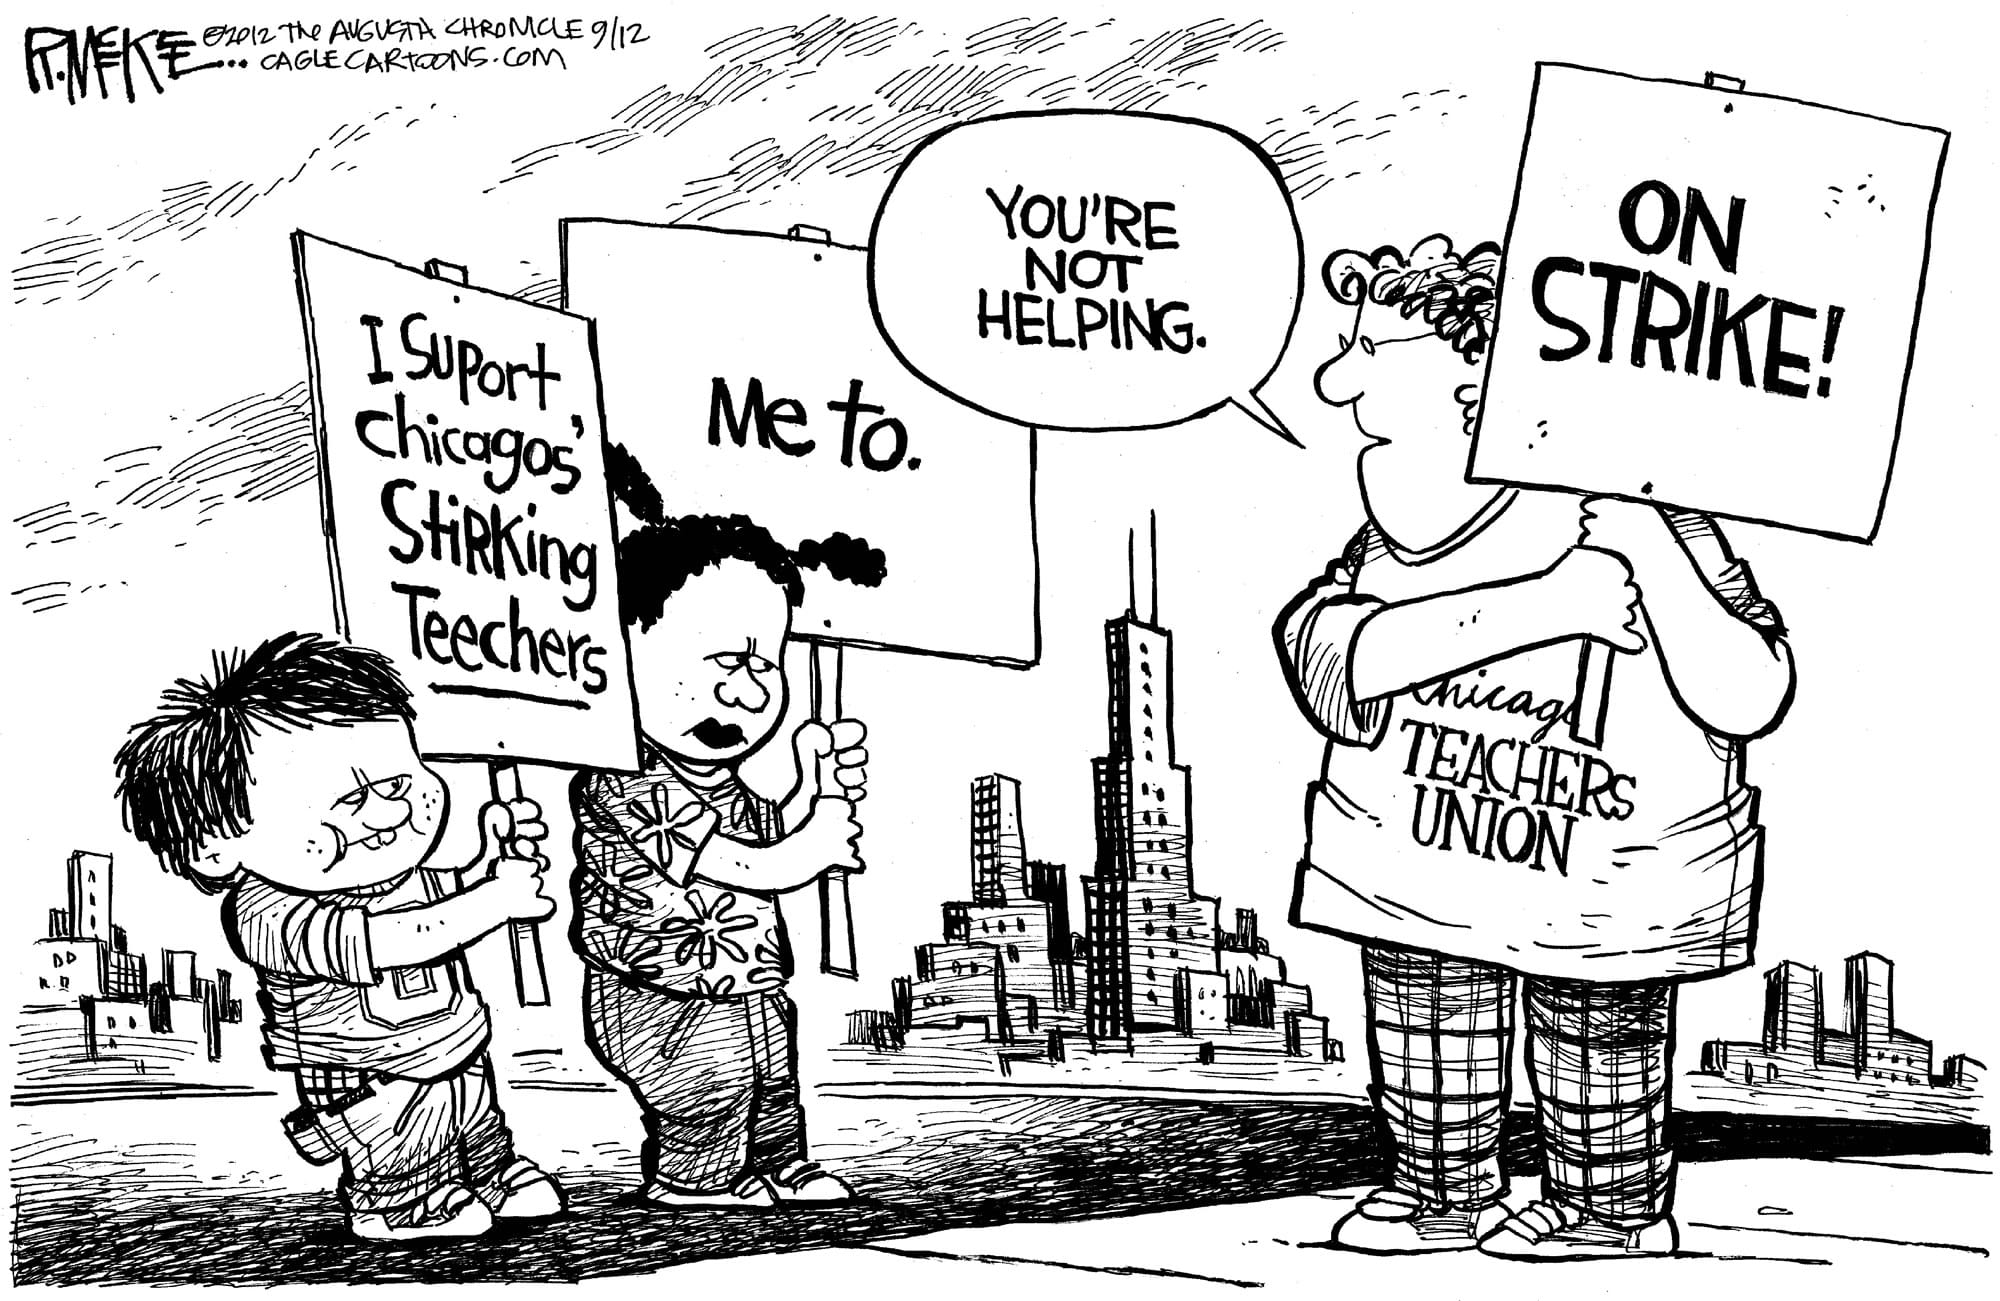 Supporting Chicago Teachers